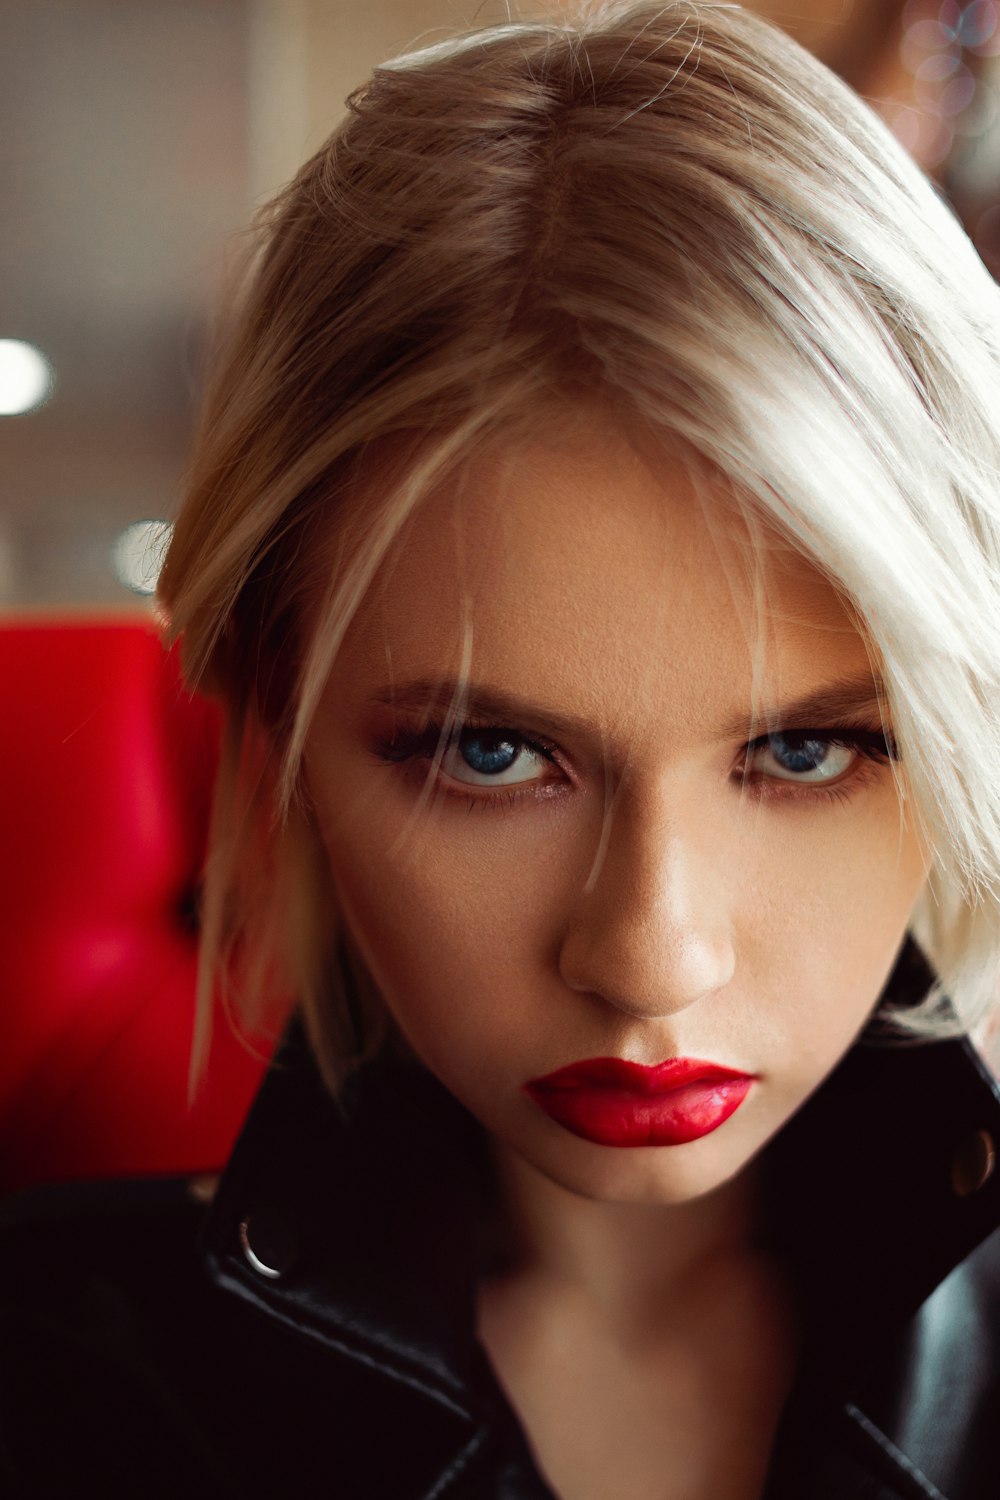 Woman With Blonde Hair Wearing Red Lipstick Photo Free Human Image On Unsplash